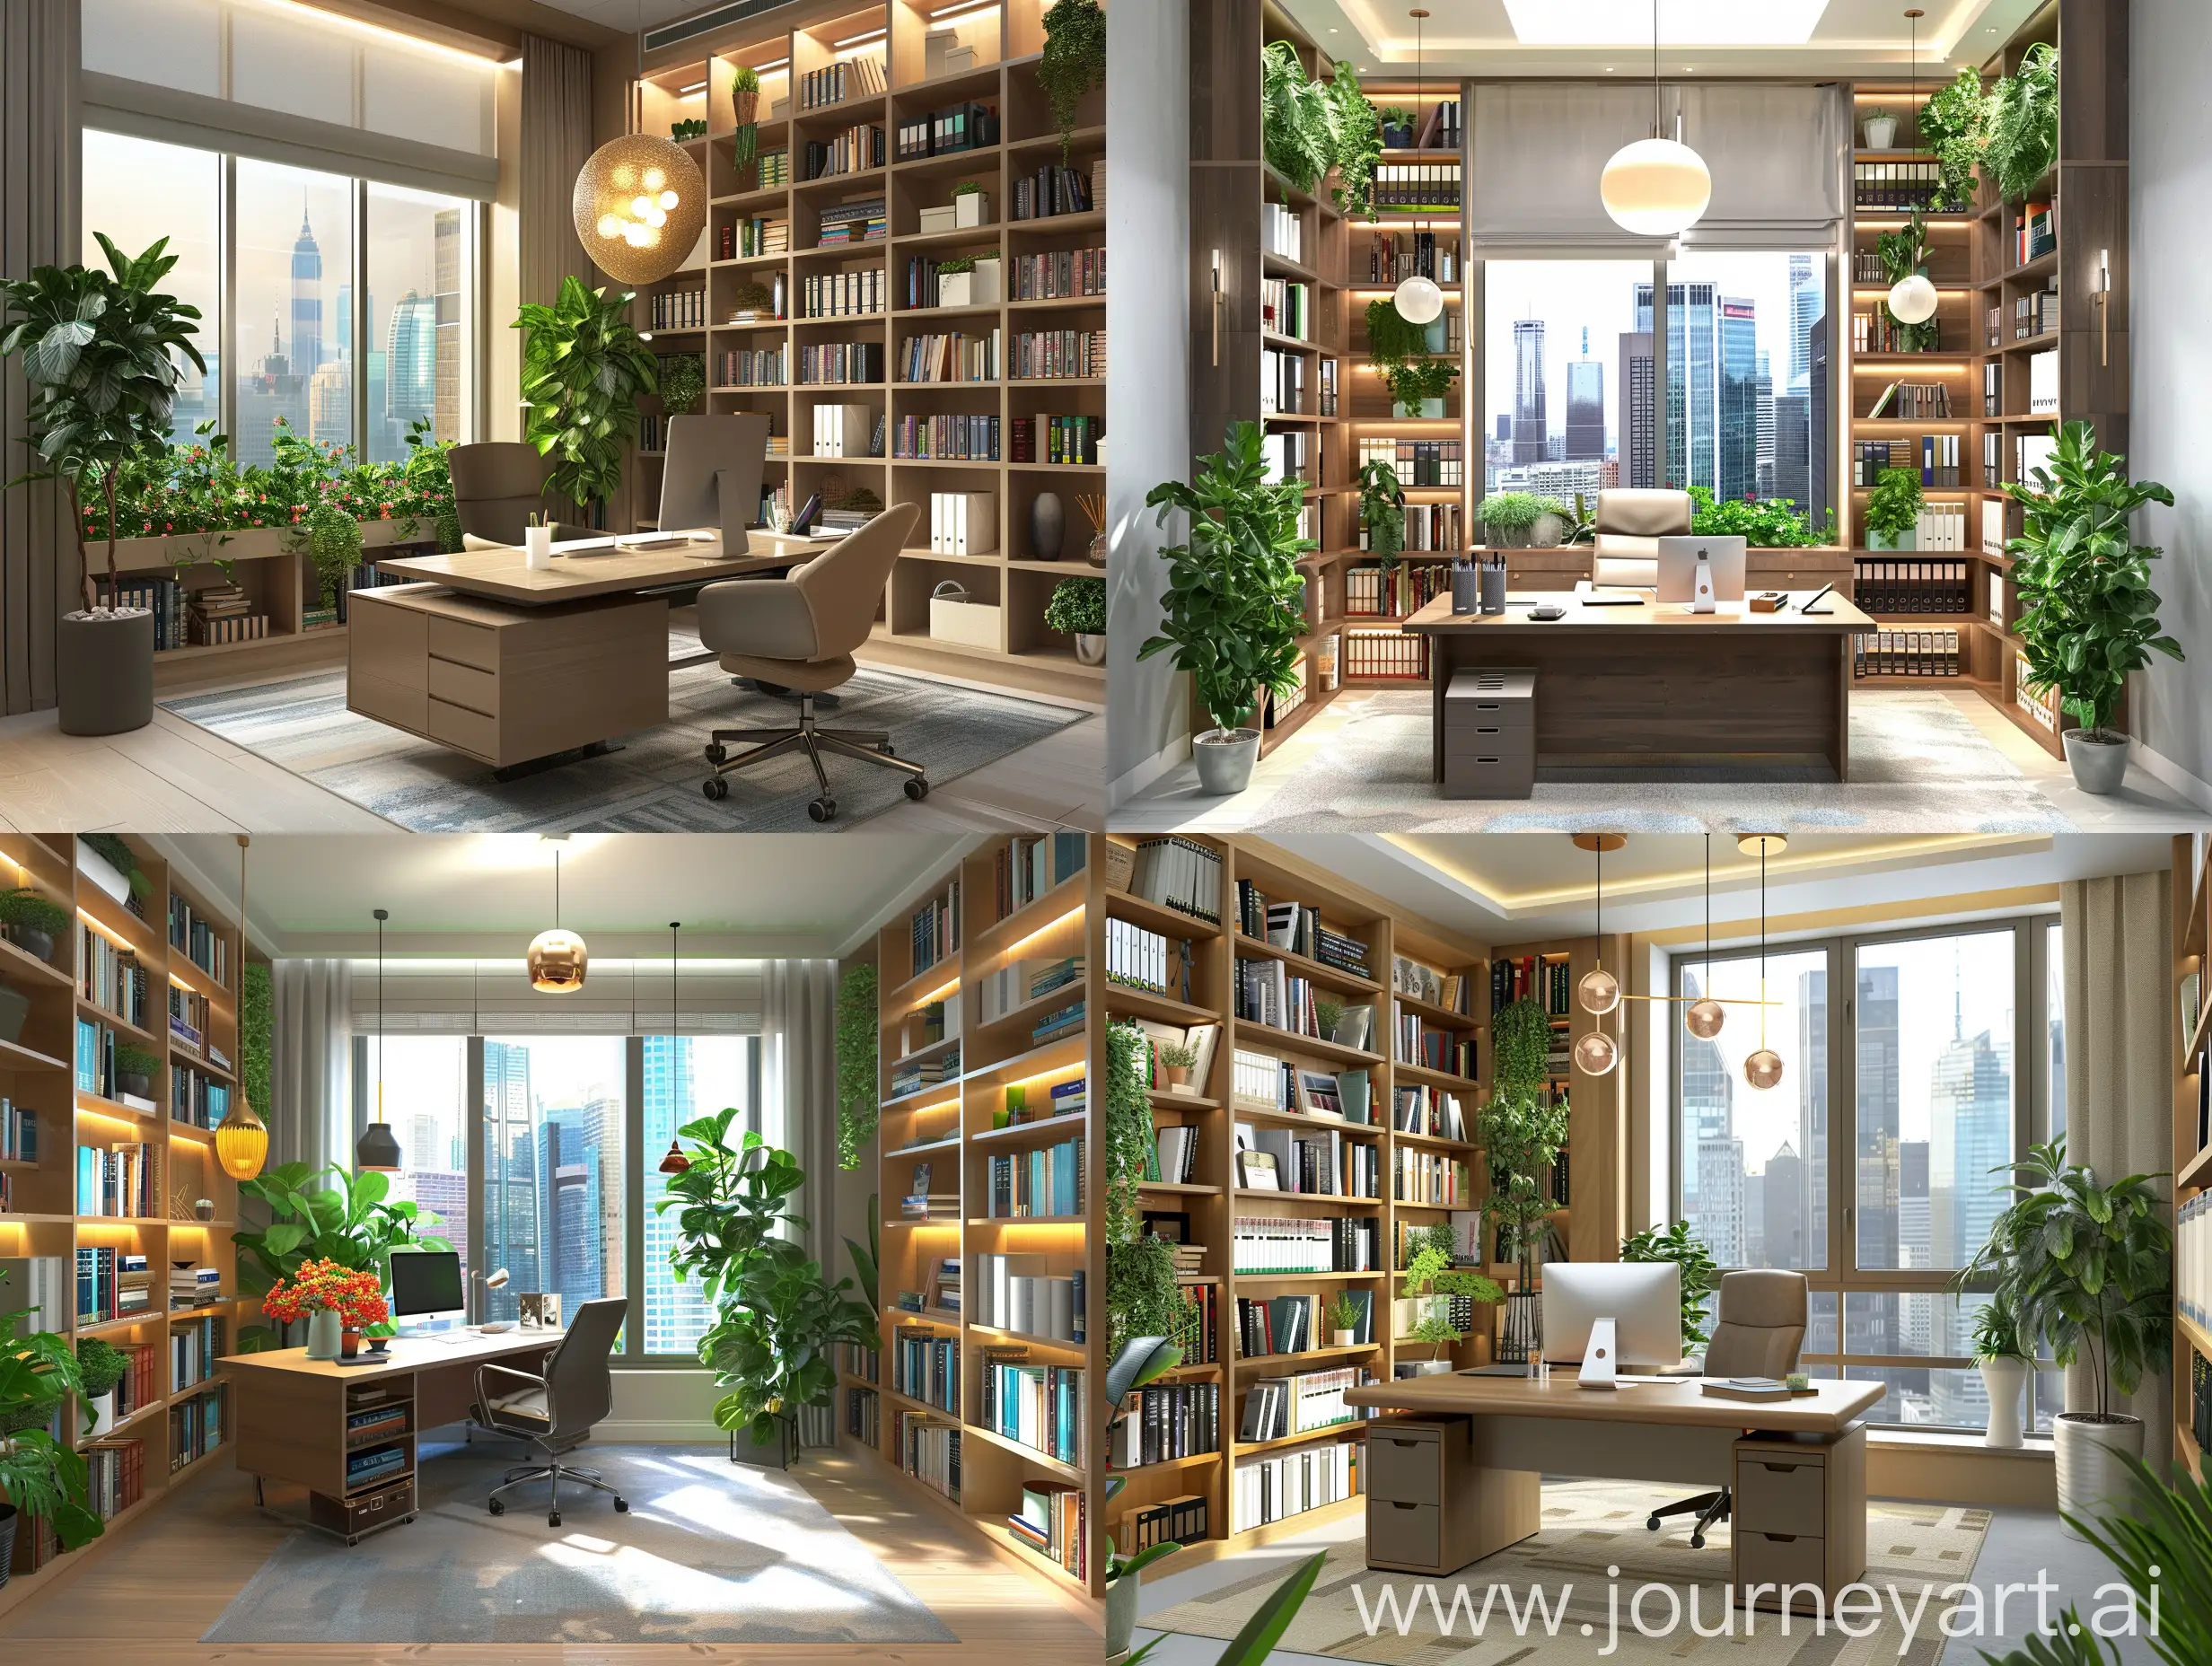 {"prompt":"A 3D model of an office room, showcasing a modern workspace. The office should include a desk with a computer, ergonomic chair, bookshelves filled with various books, a large window with a view of the city skyline, indoor plants, and modern lighting fixtures. The atmosphere should be professional yet inviting, with a color scheme that includes neutral tones and a touch of green from the plants. The layout should be spacious and well-organized, illustrating a productive and comfortable work environment.","size":"1024x1024"}